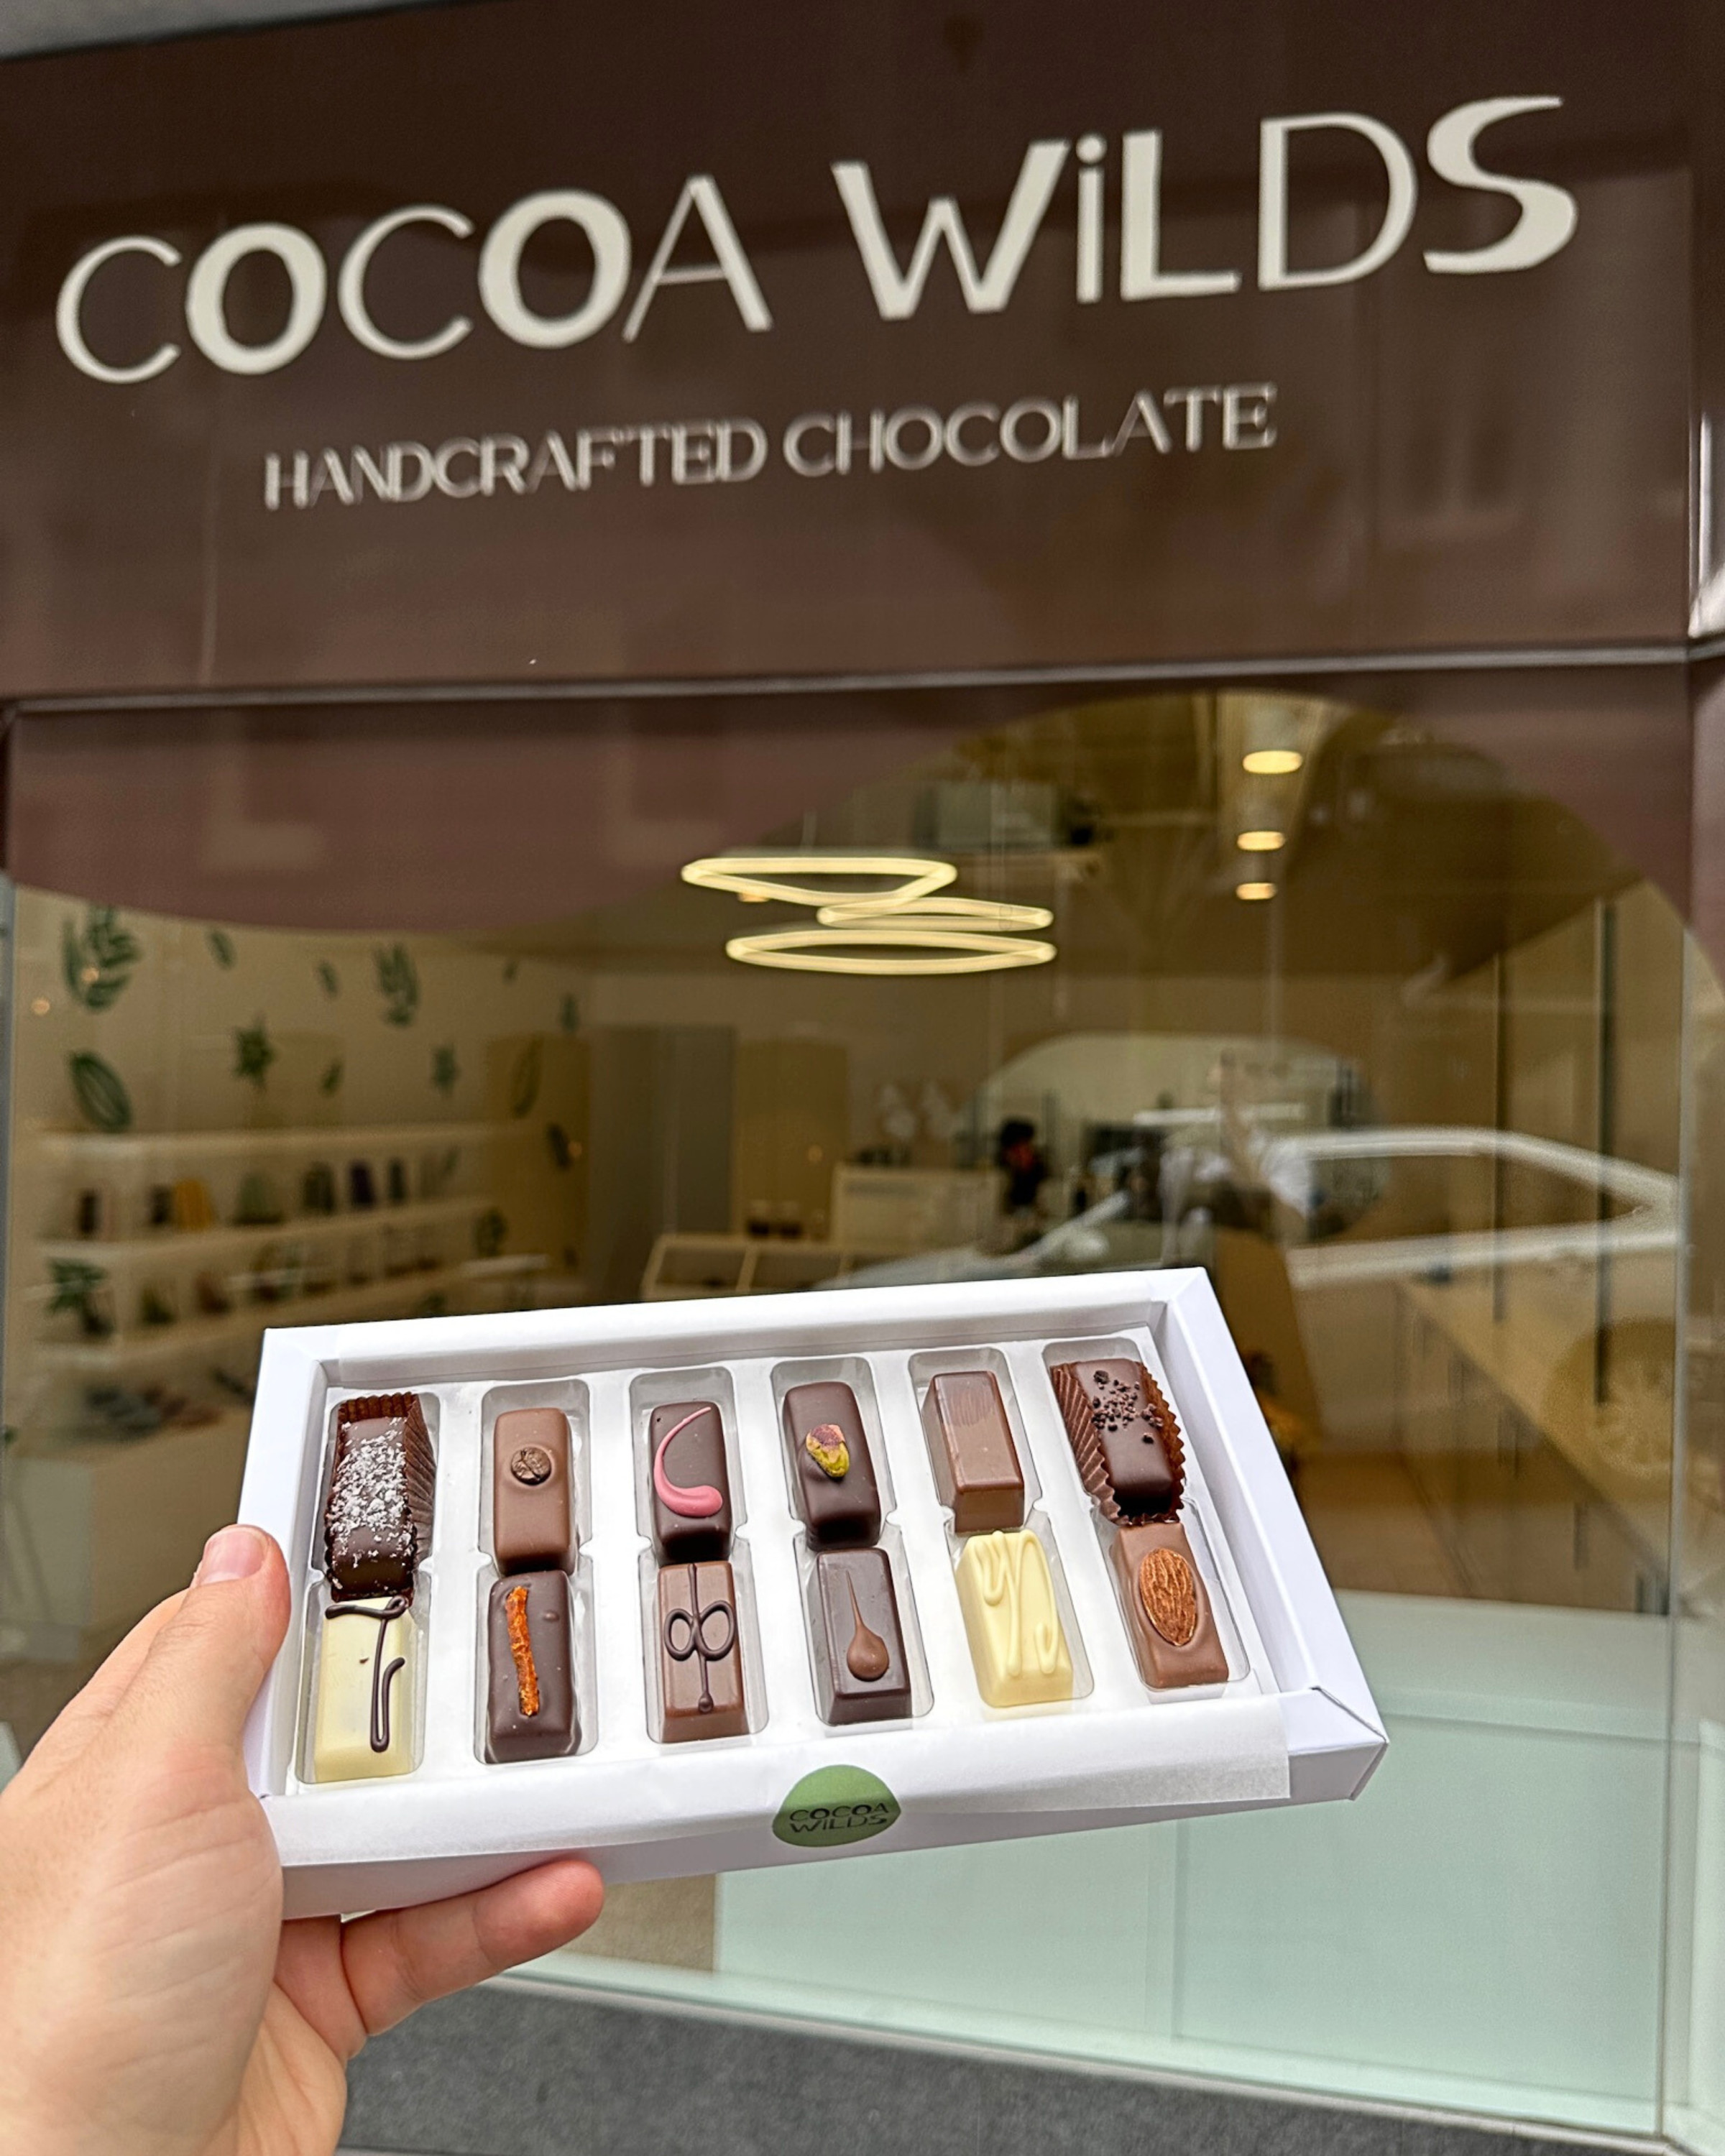 New chocolate shop Cocoa Wilds has opened in Auckland